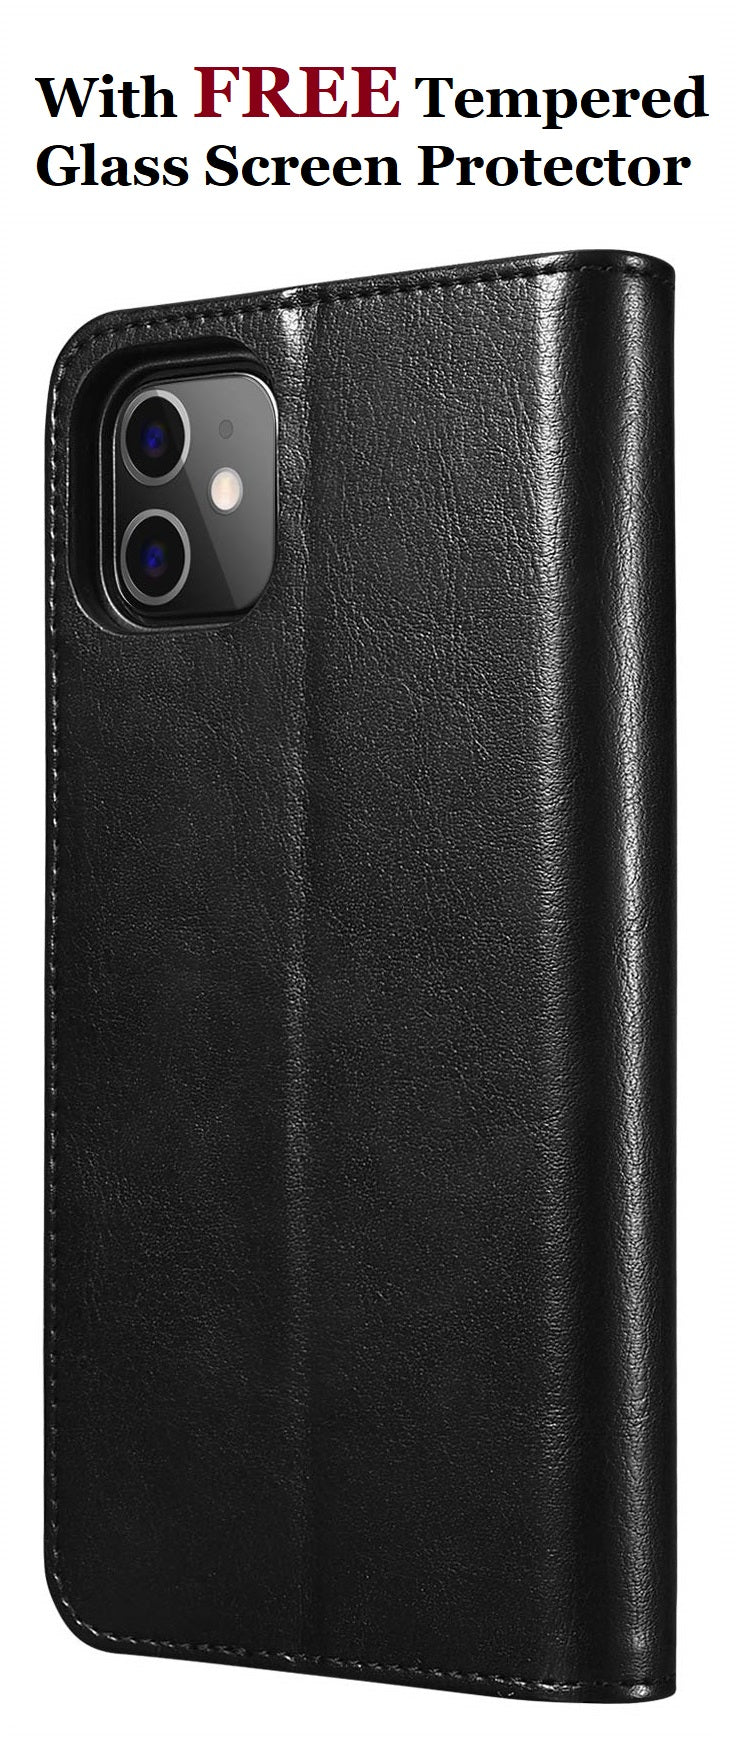 premium slim leather full cover flip case for apple iphone 11 and 12 series | marketzone christchurch